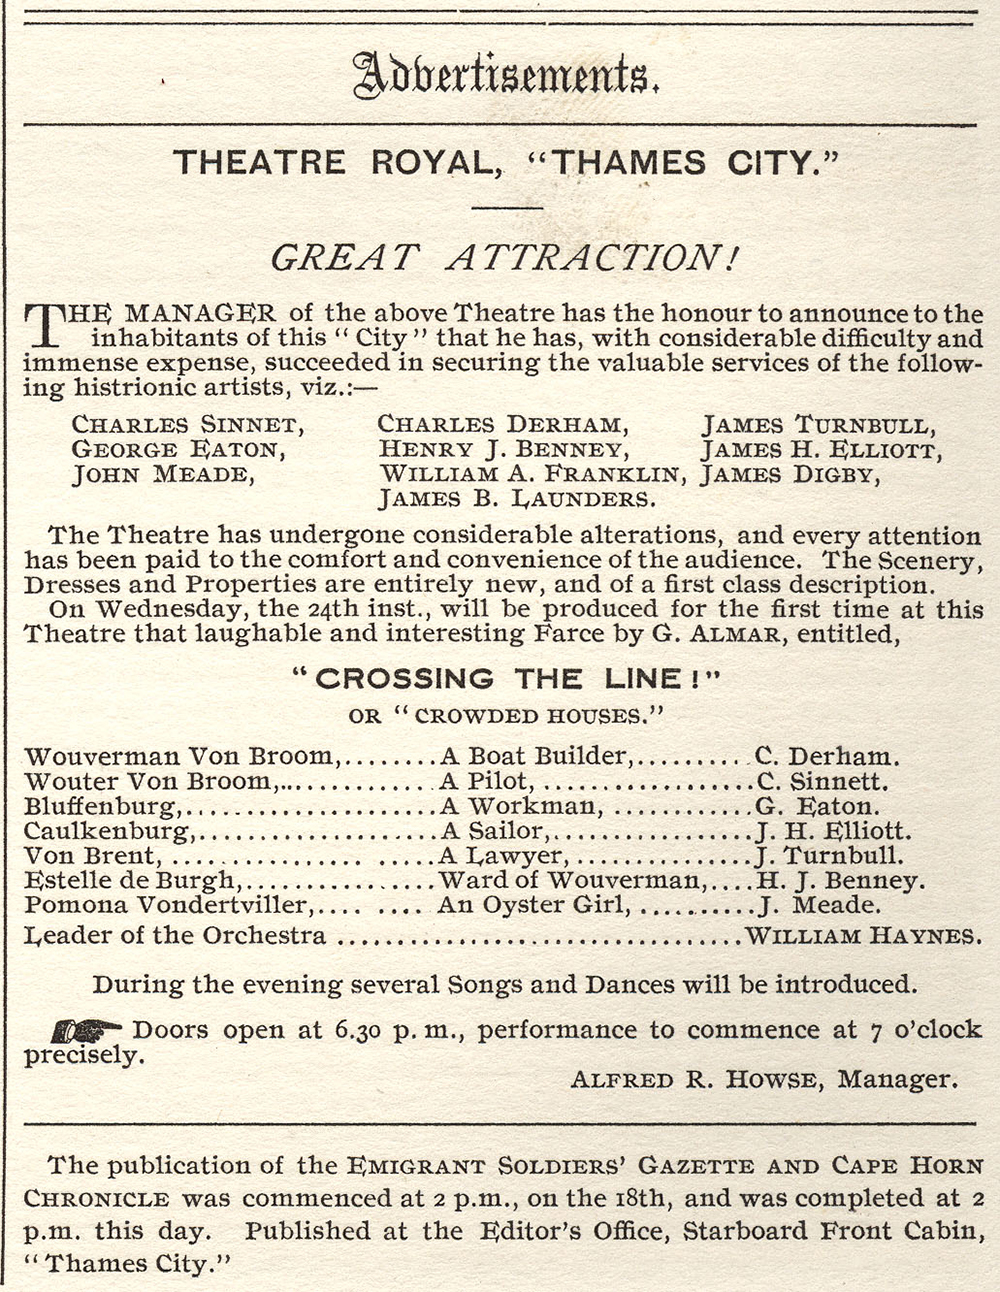 An advertisement for the Theatre Royal from The Emigrant Soldiers’ Gazette and Cape Horn Chronicle. It lists the names of performers in the upcoming play titled, “Crossing the Line! or Crowded Houses.”